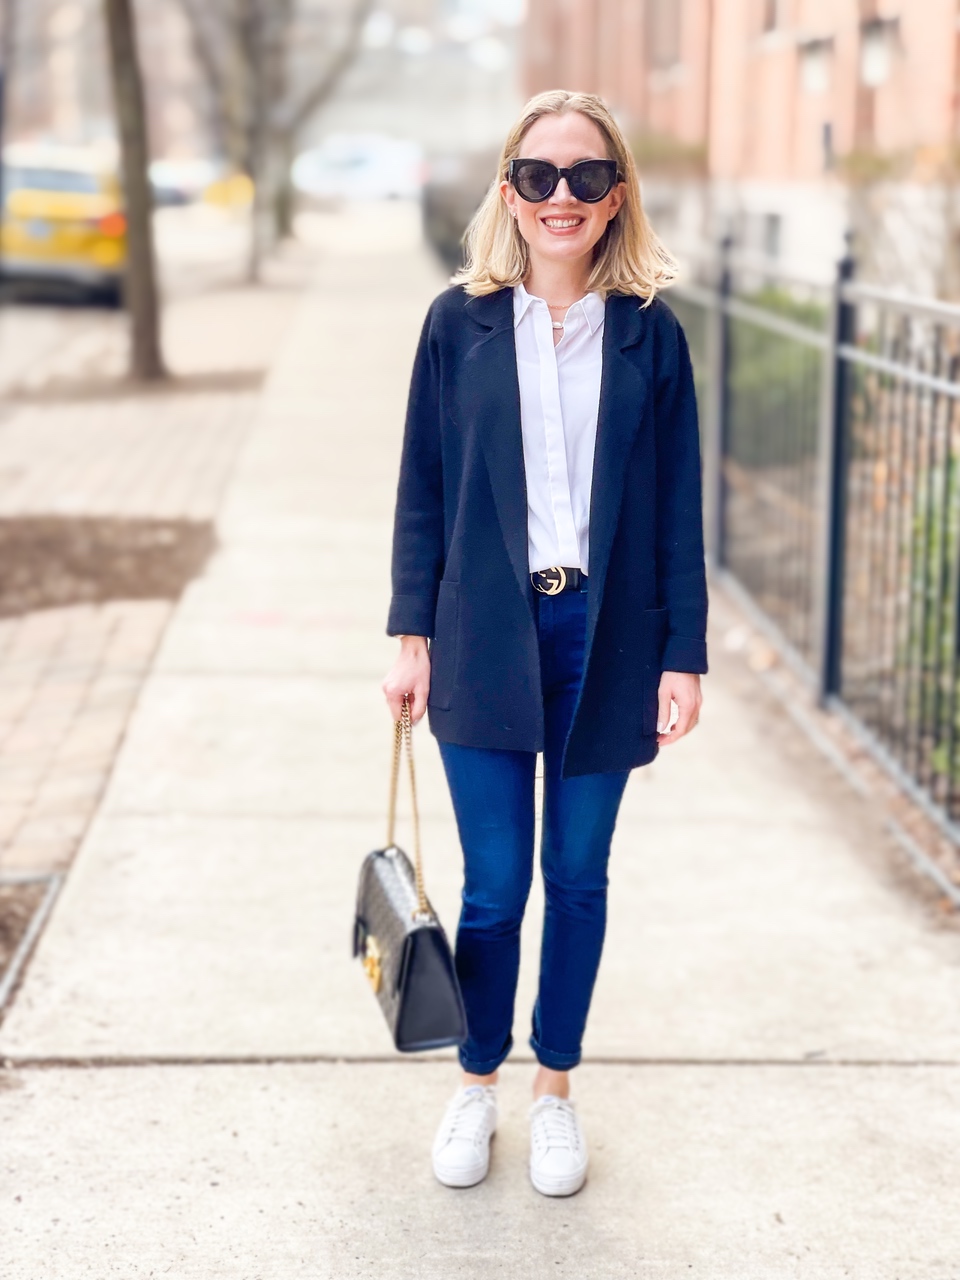 Classic Spring Look – The Petite Fashionista